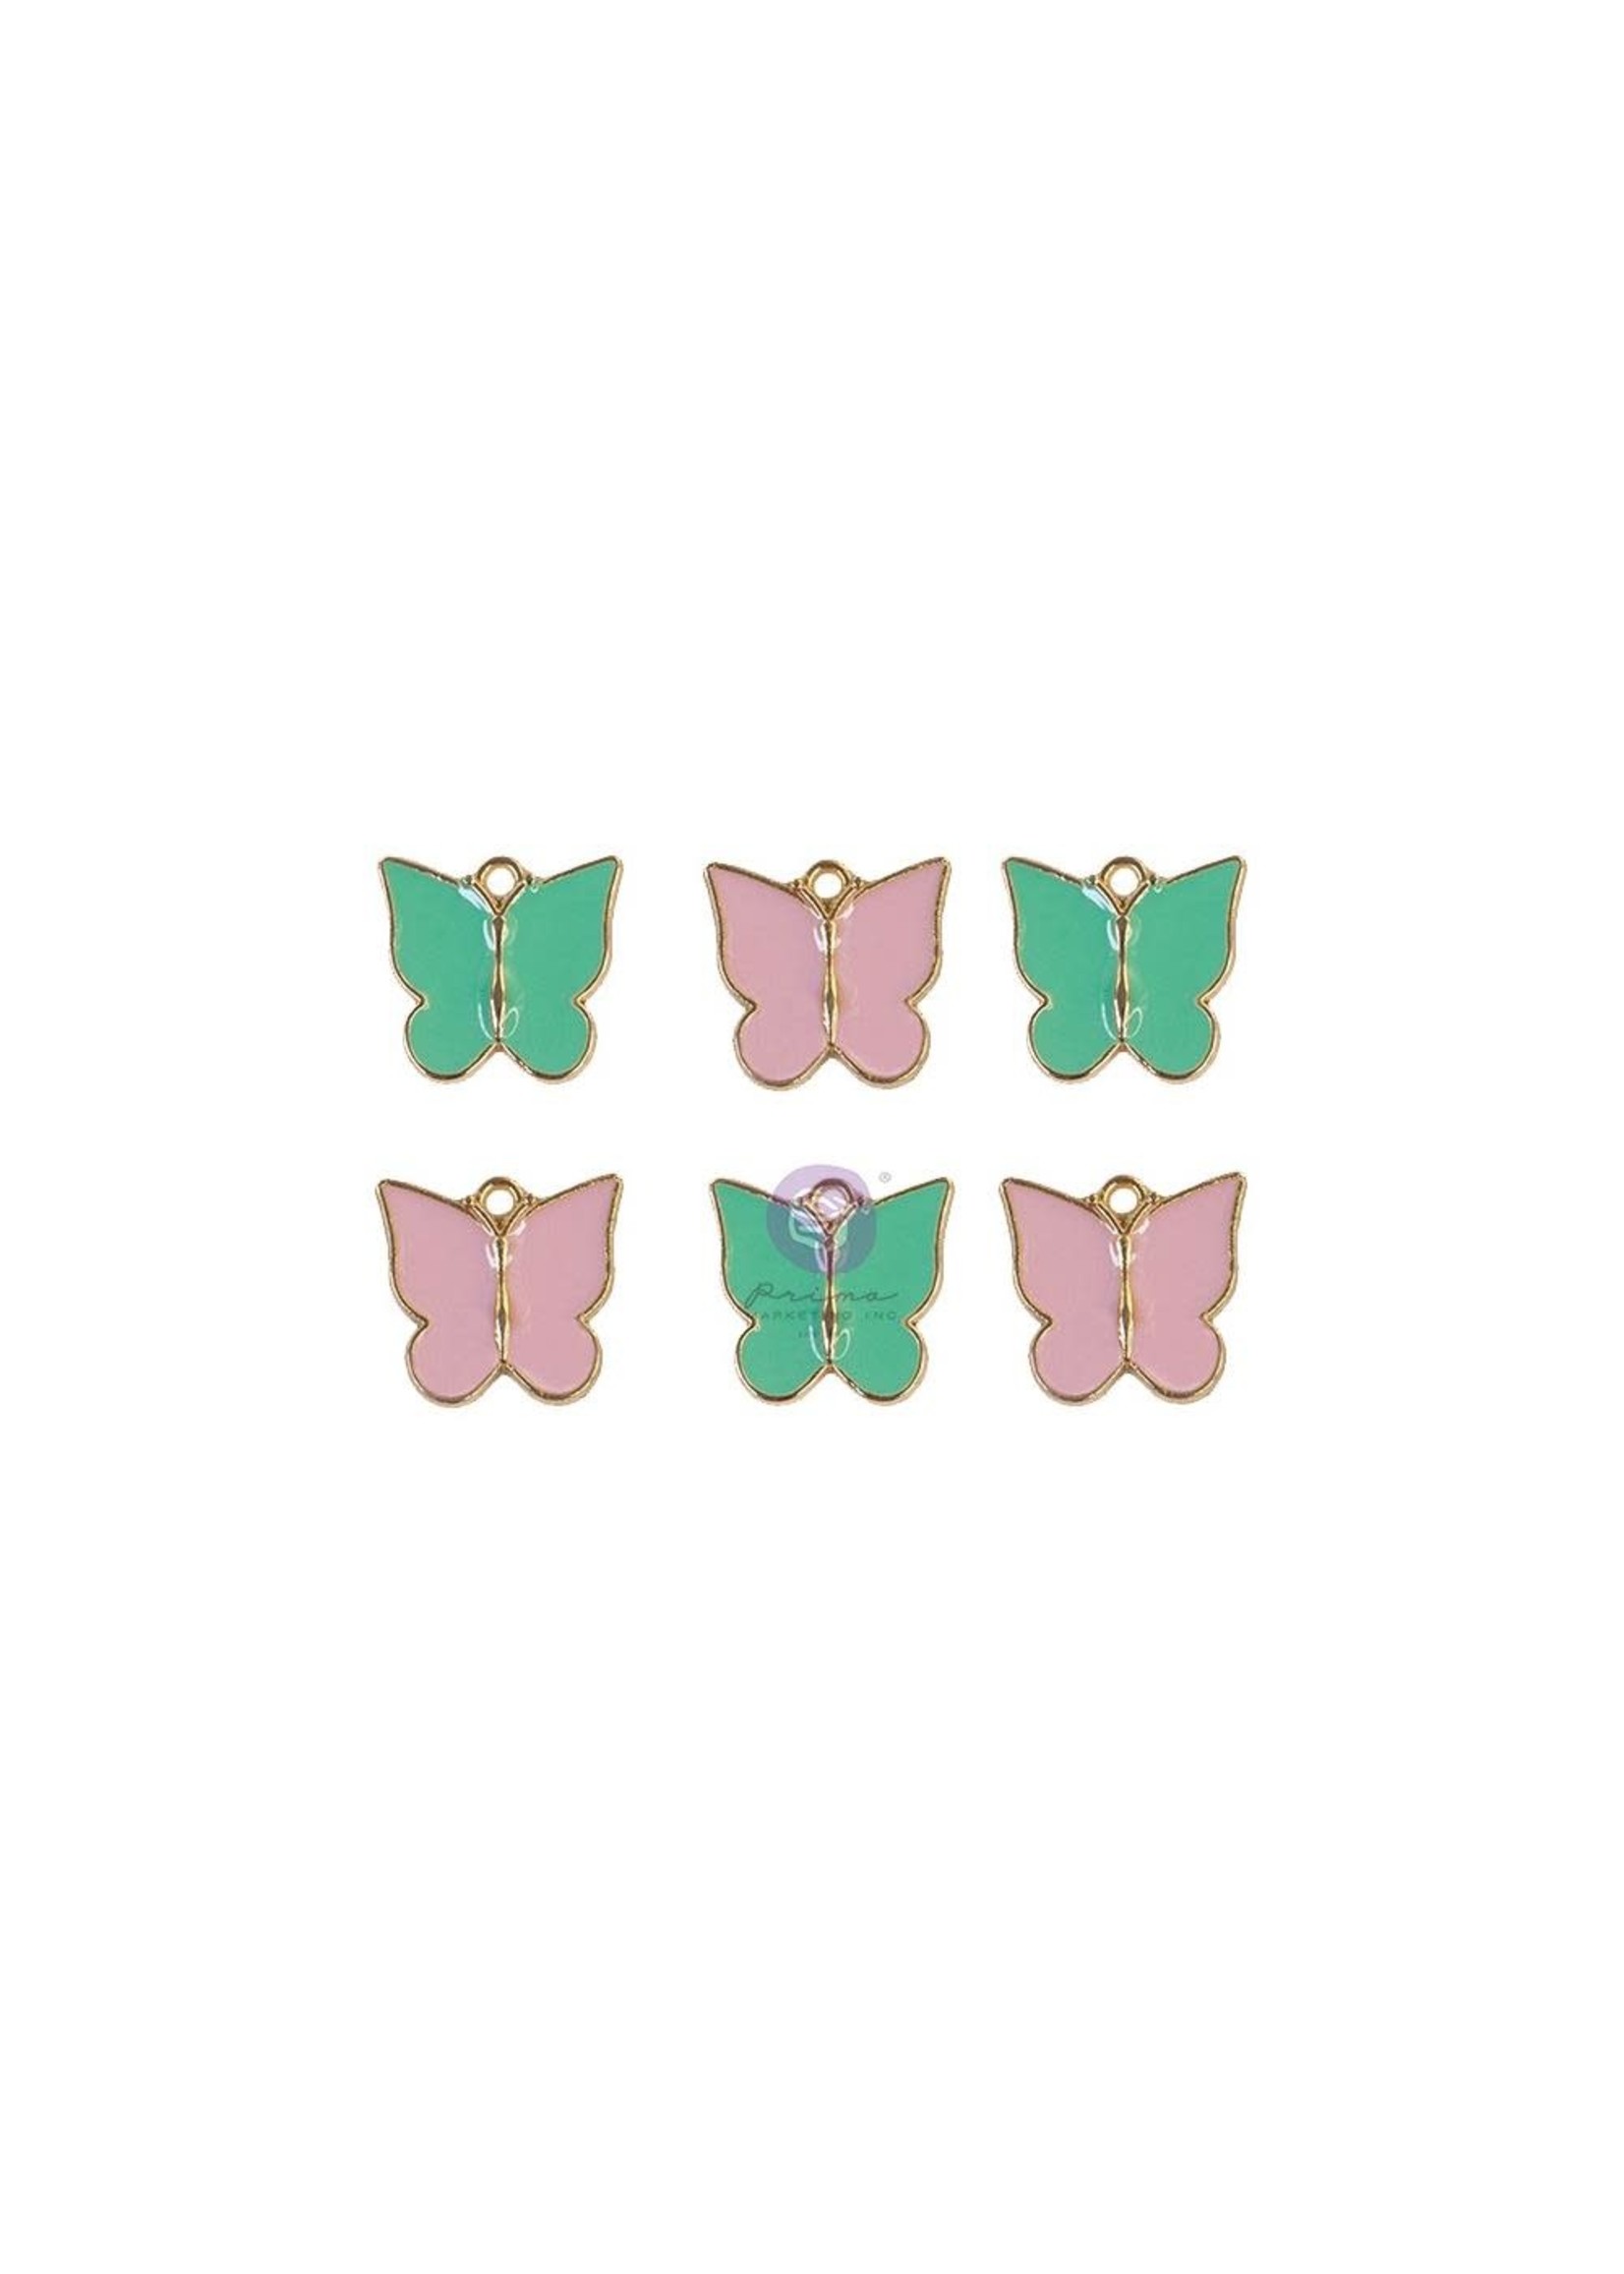 My Sweet: Butterfly Charms